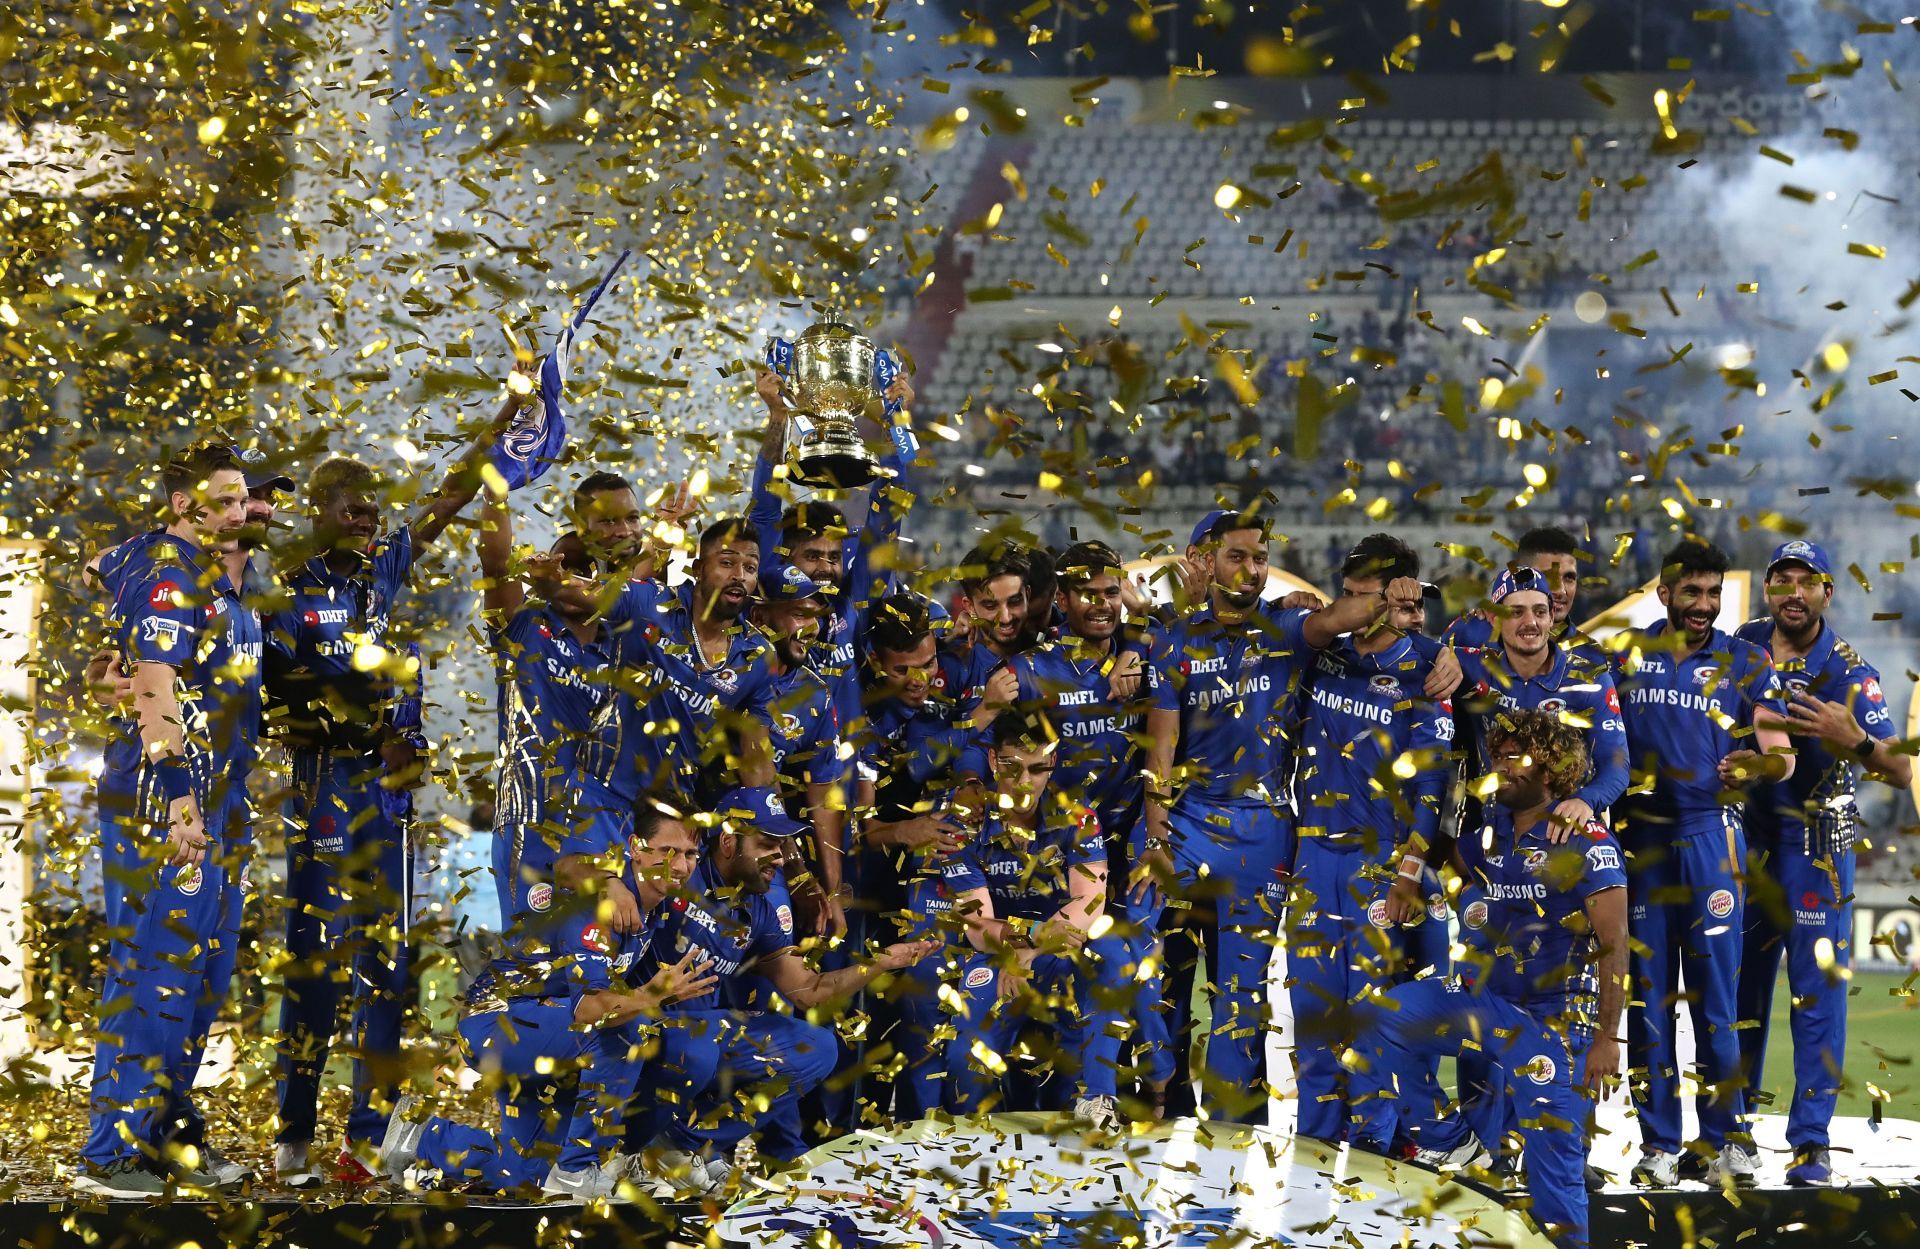 Mumbai Indians are the most successful franchise in the tournament. Pic: Getty Images